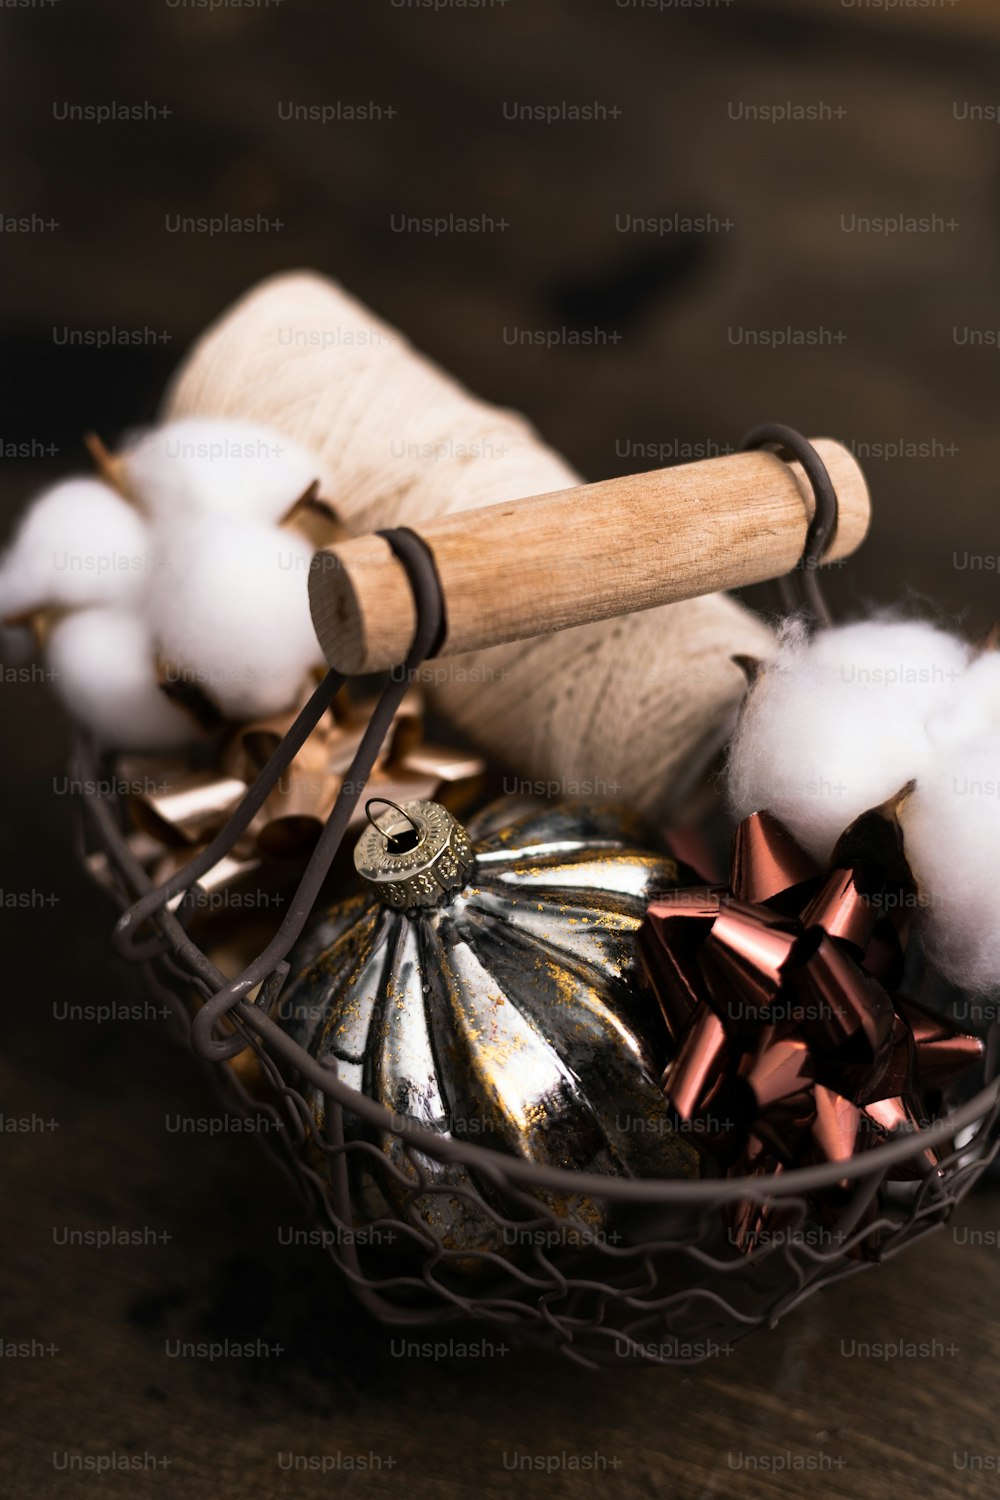 a basket filled with cotton and a wooden spool